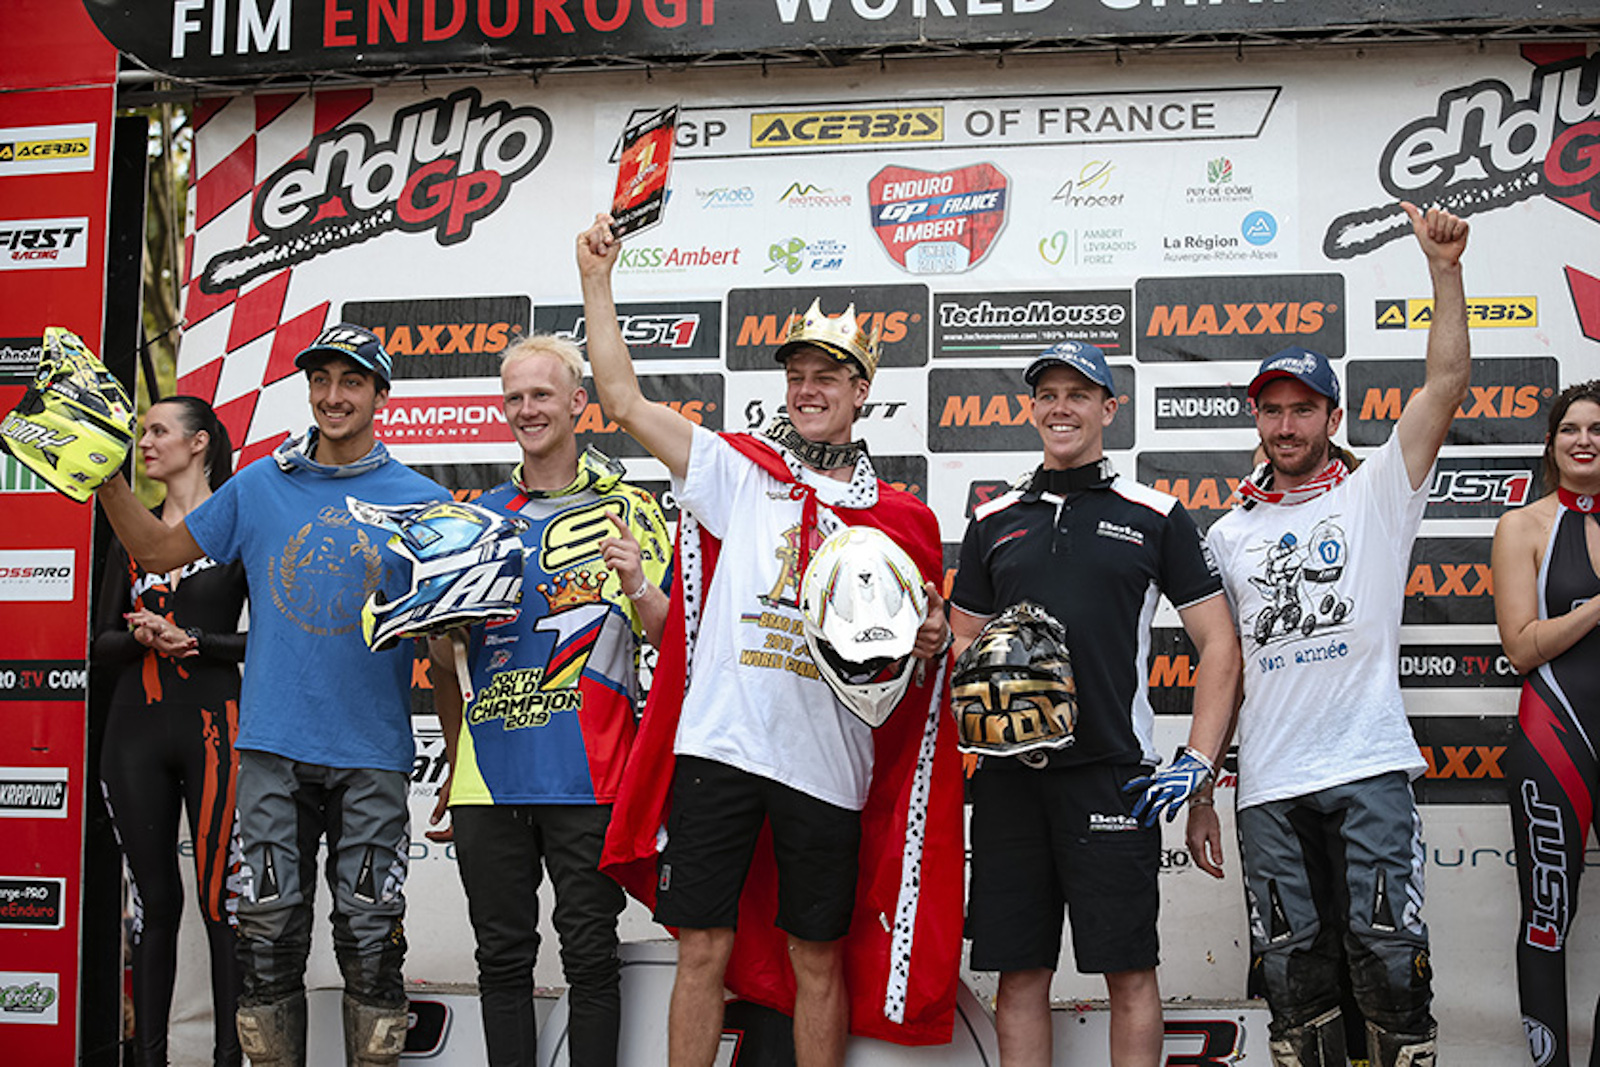 EnduroGP 2019: 5 things we learned from the final GP of 2019 in France  